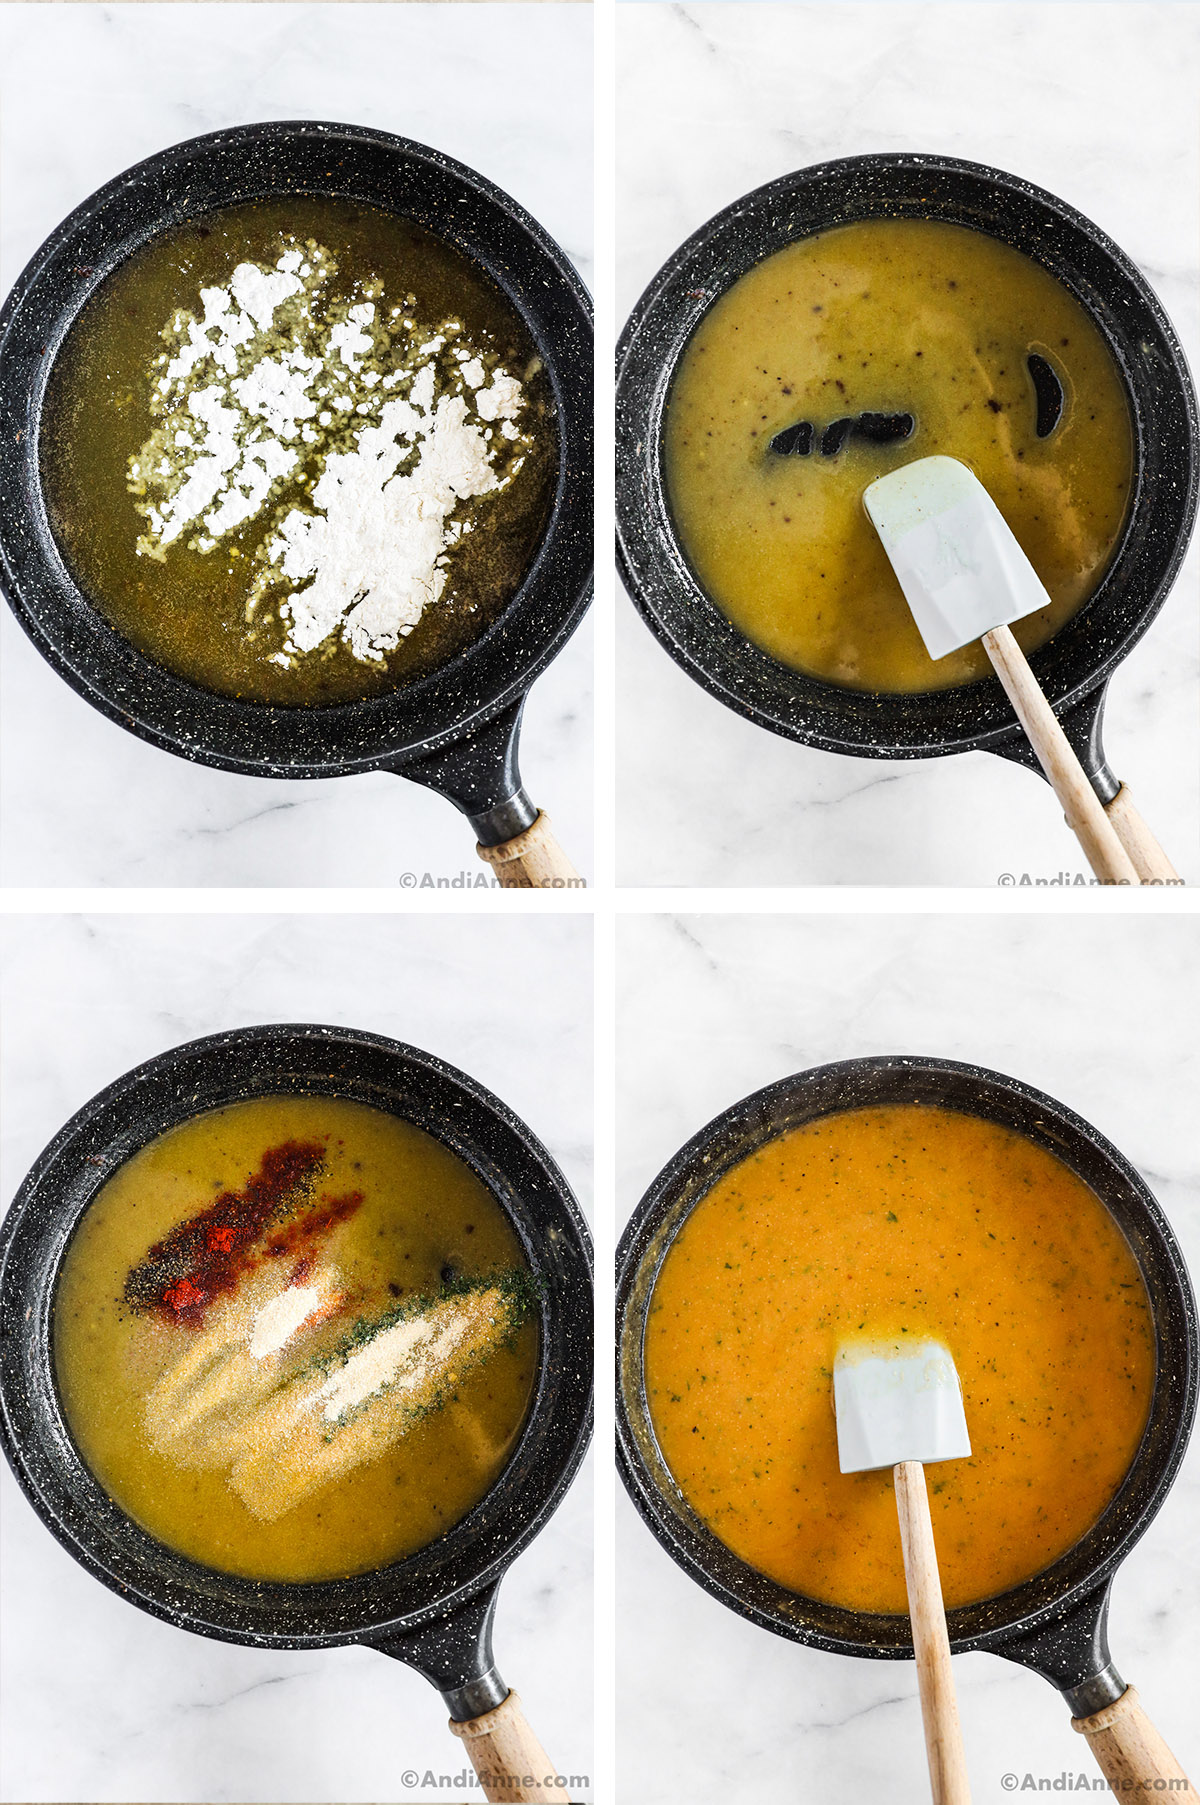 Four images of gravy being mixed in a pan in different stages.